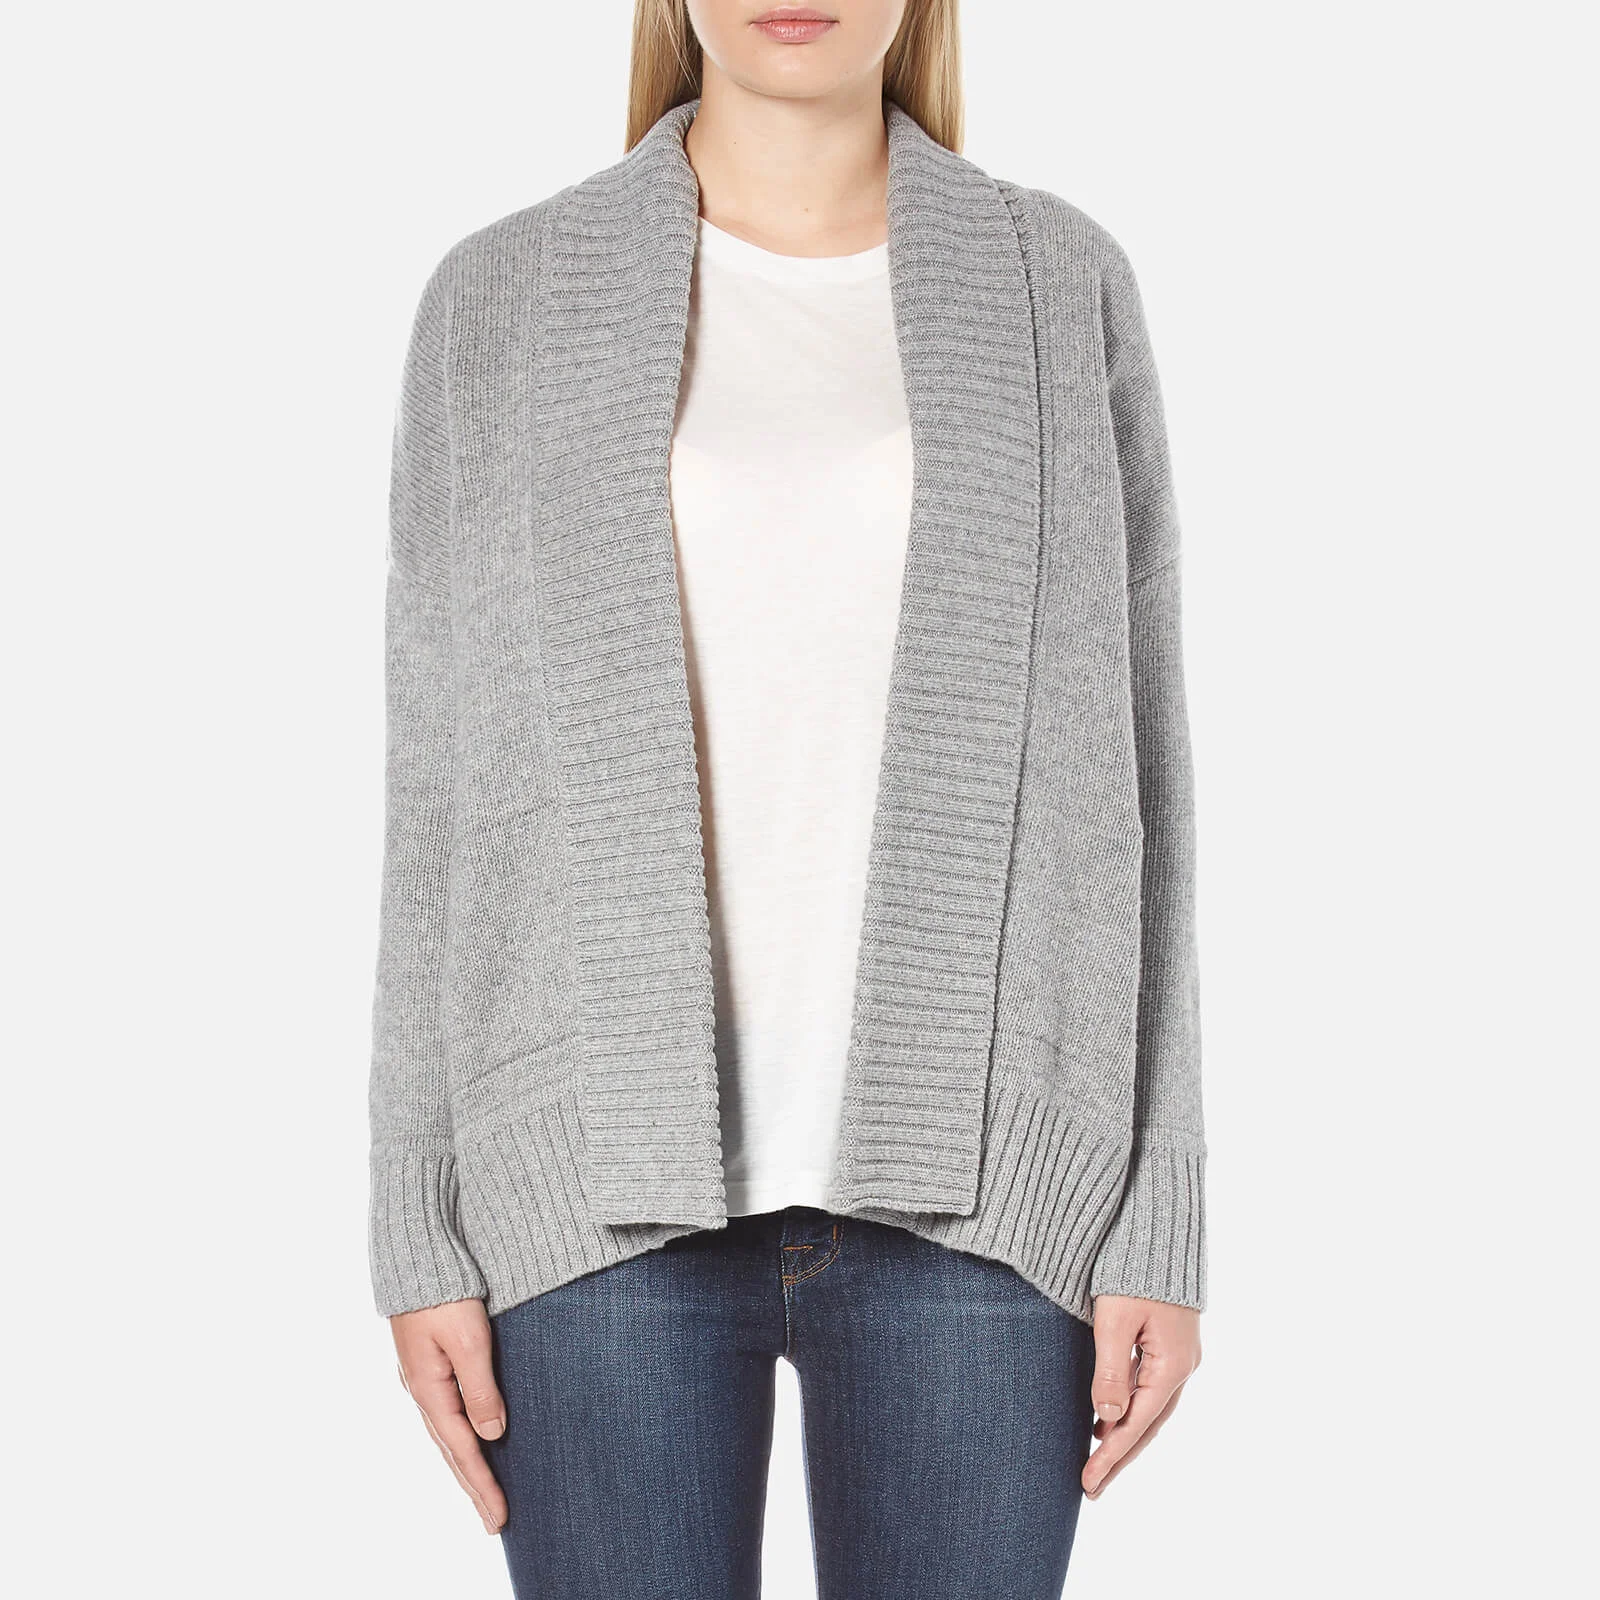 Barbour Women's Avalanche Oversized Cardigan - Grey Marl Image 1